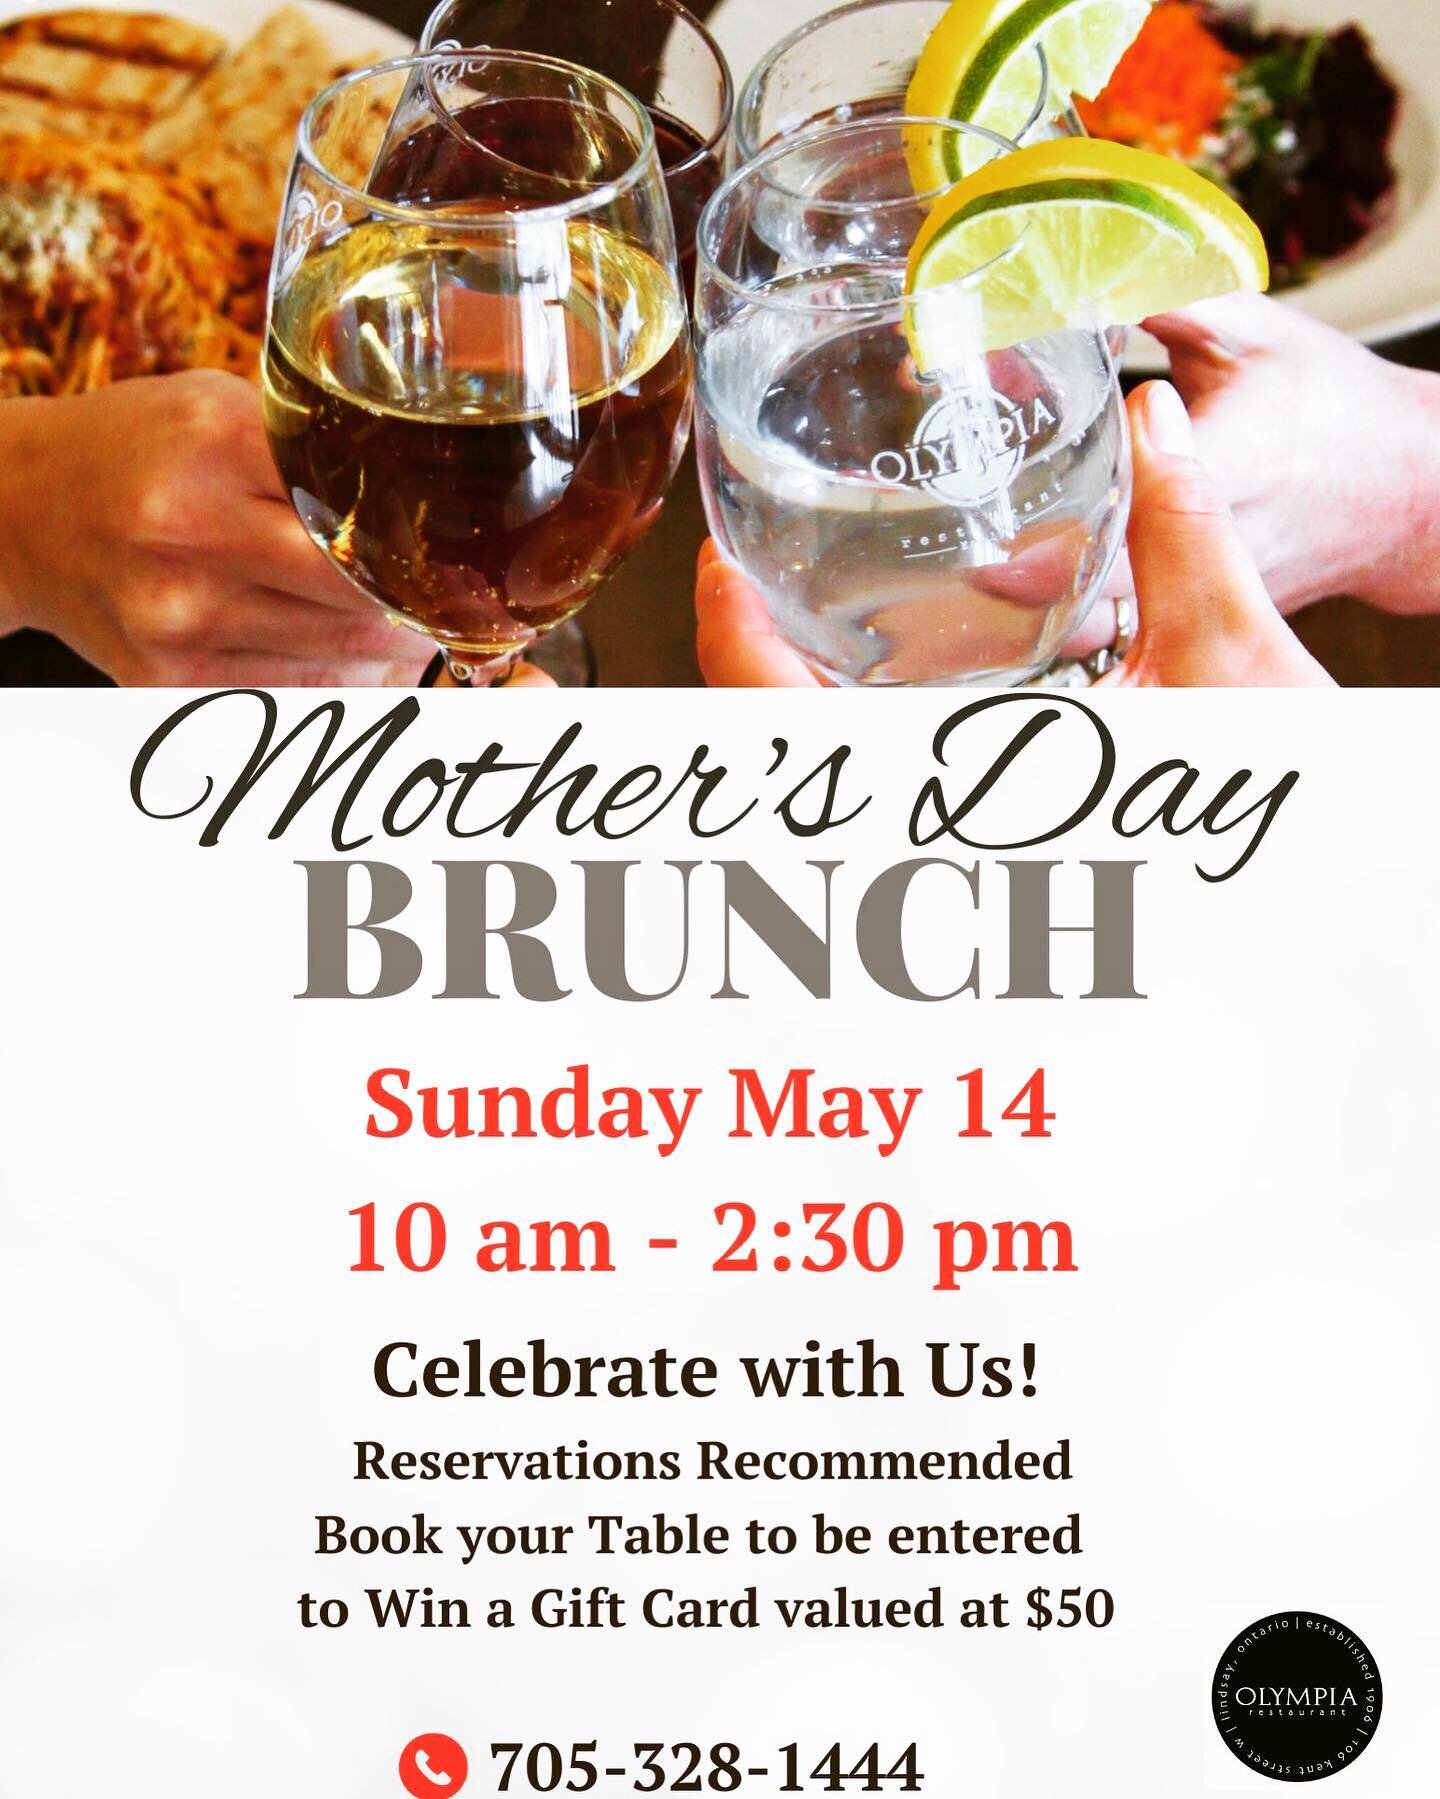 Celebrate Mother&rsquo;s Day at the Olympia. Brunch menu, something for everyone. Reservations recommended. Book your table, be entered into our draw to win a $50 Olympia gift card.